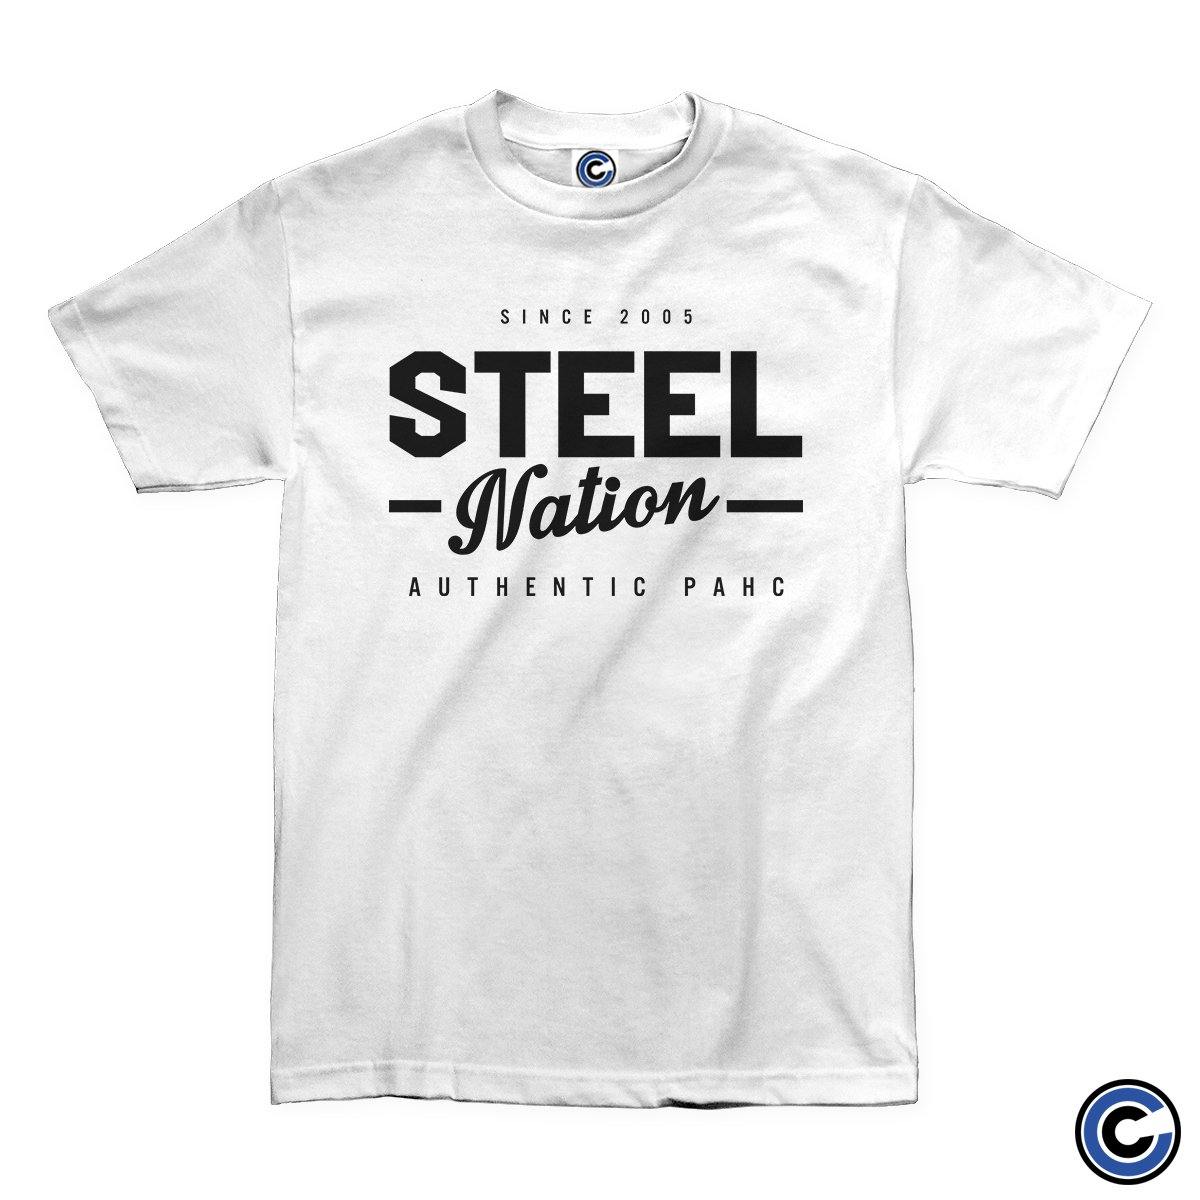 Buy – Steel Nation "Authentic" Shirt – Band & Music Merch – Cold Cuts Merch